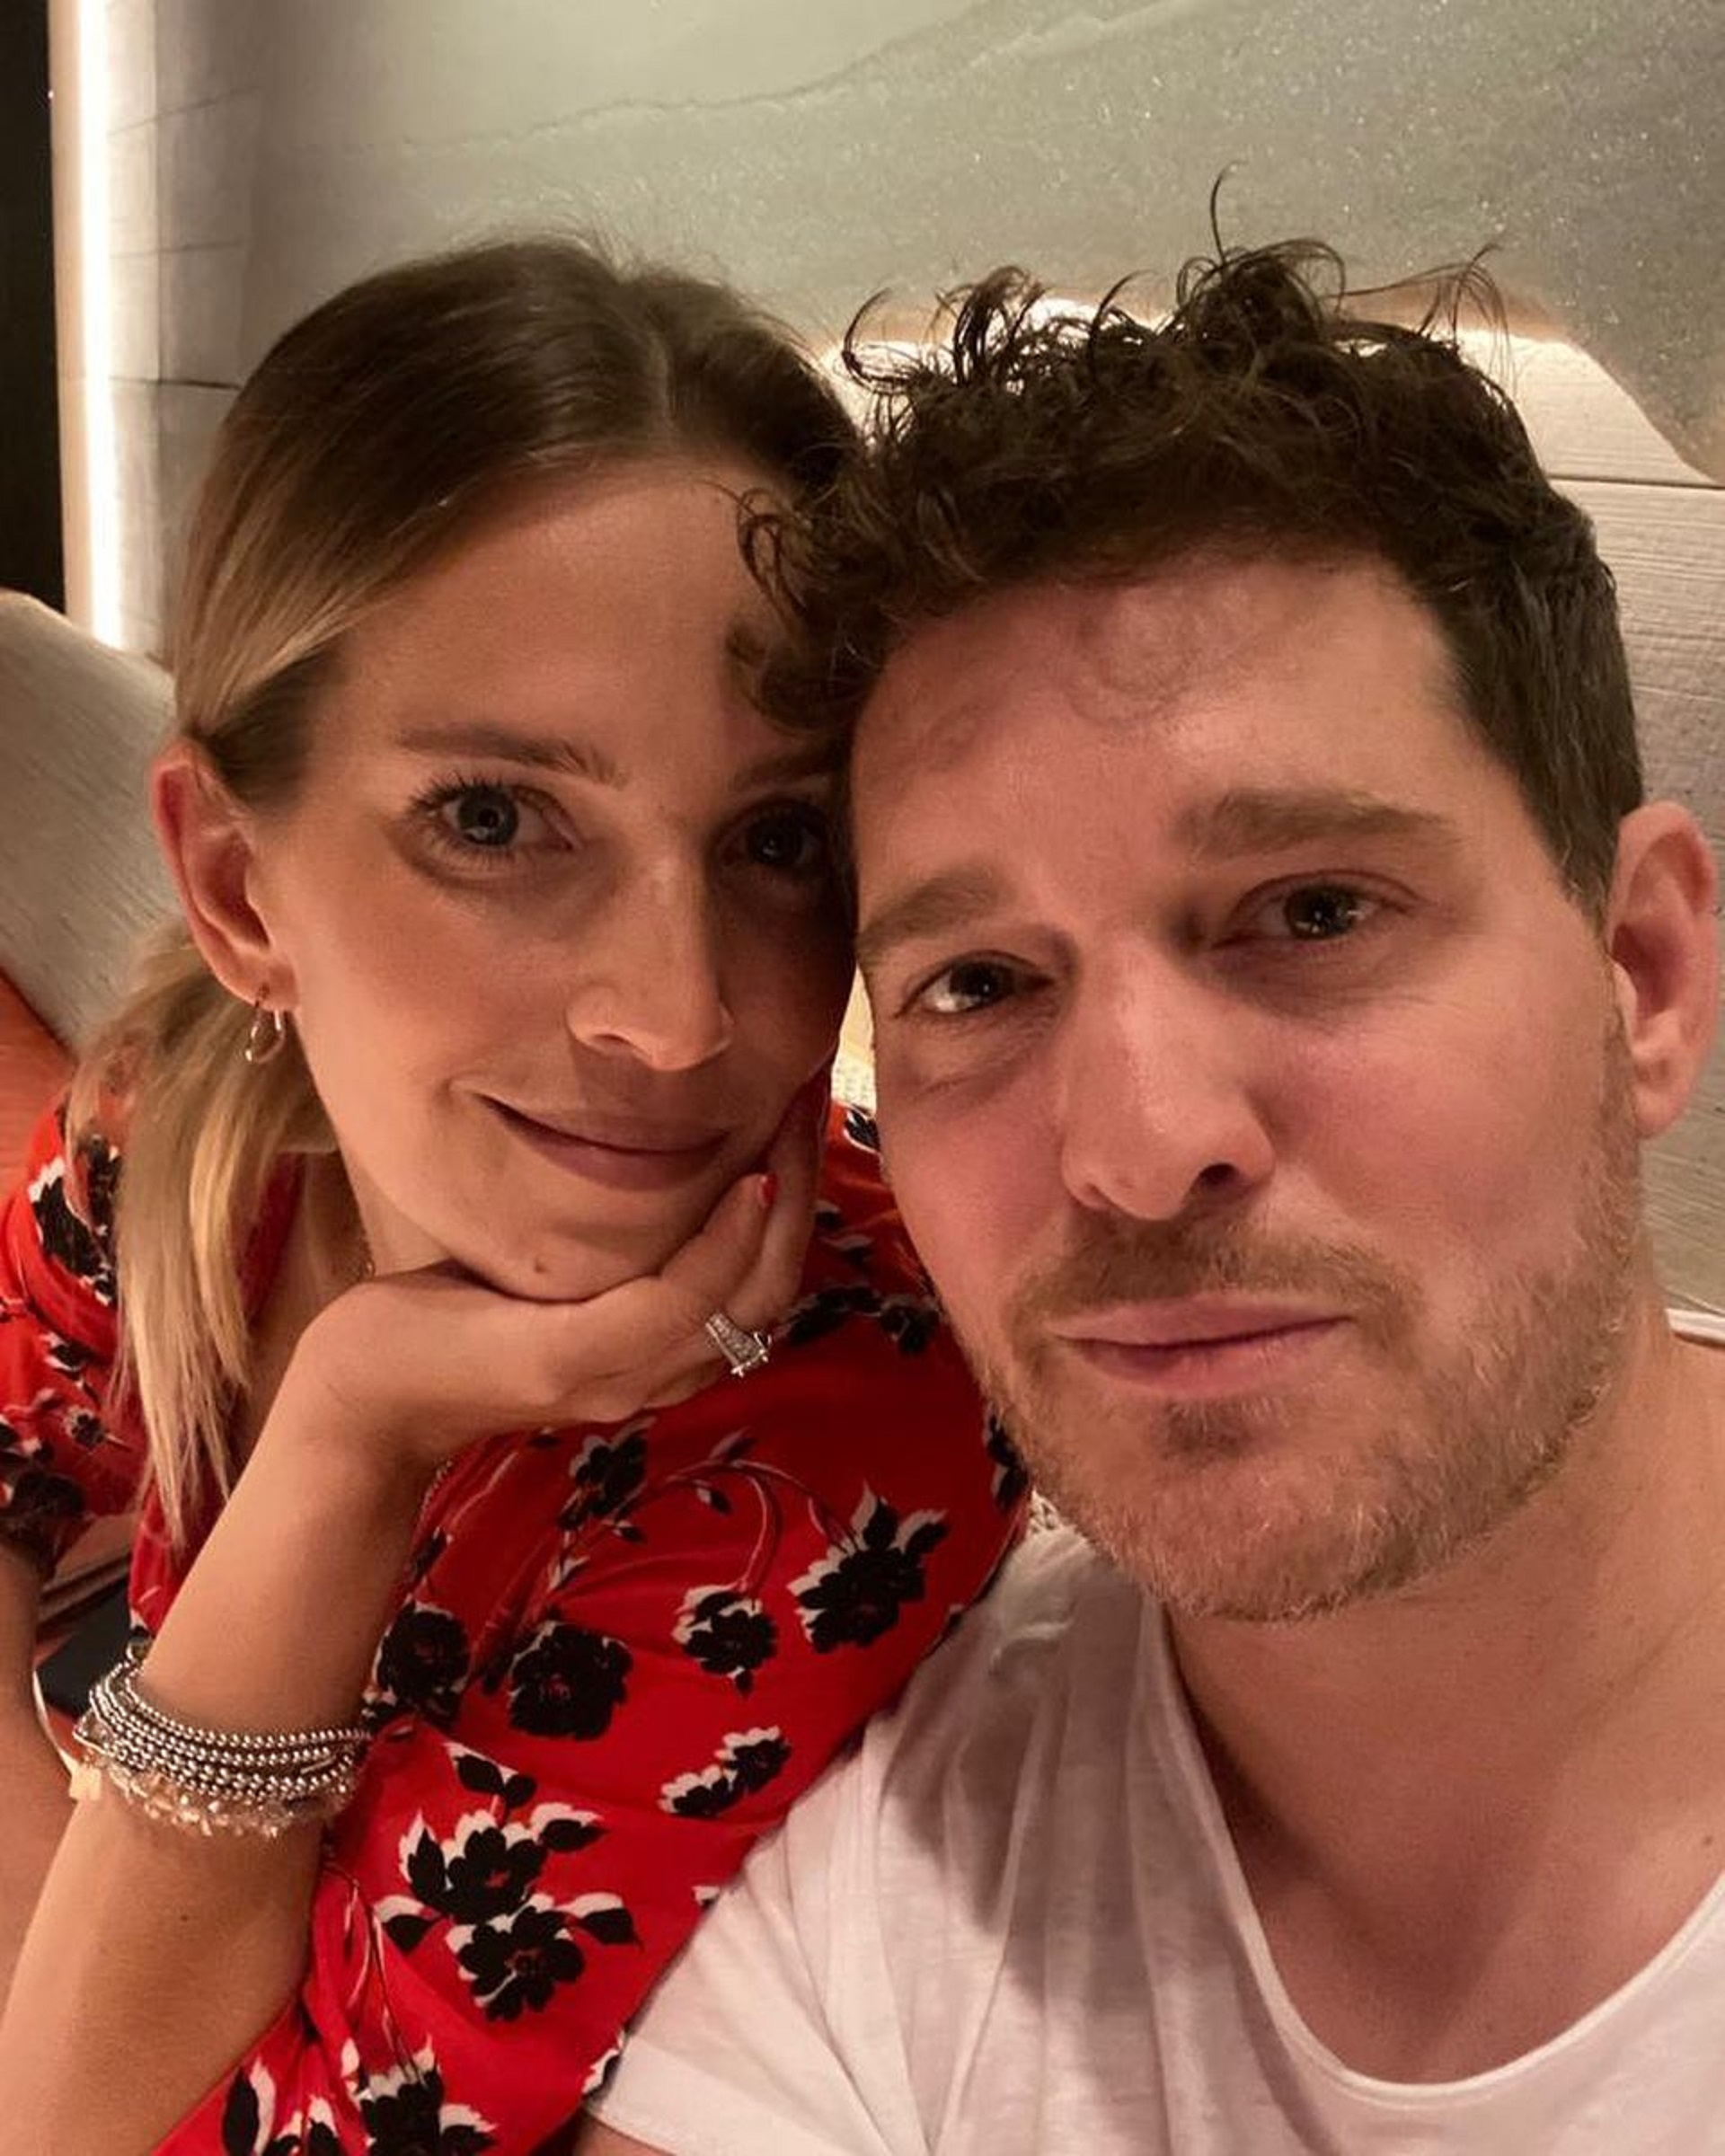 Luisana Lopilato and Michael Bublé are parents of Noah, Elías, Vida and expect their fourth baby